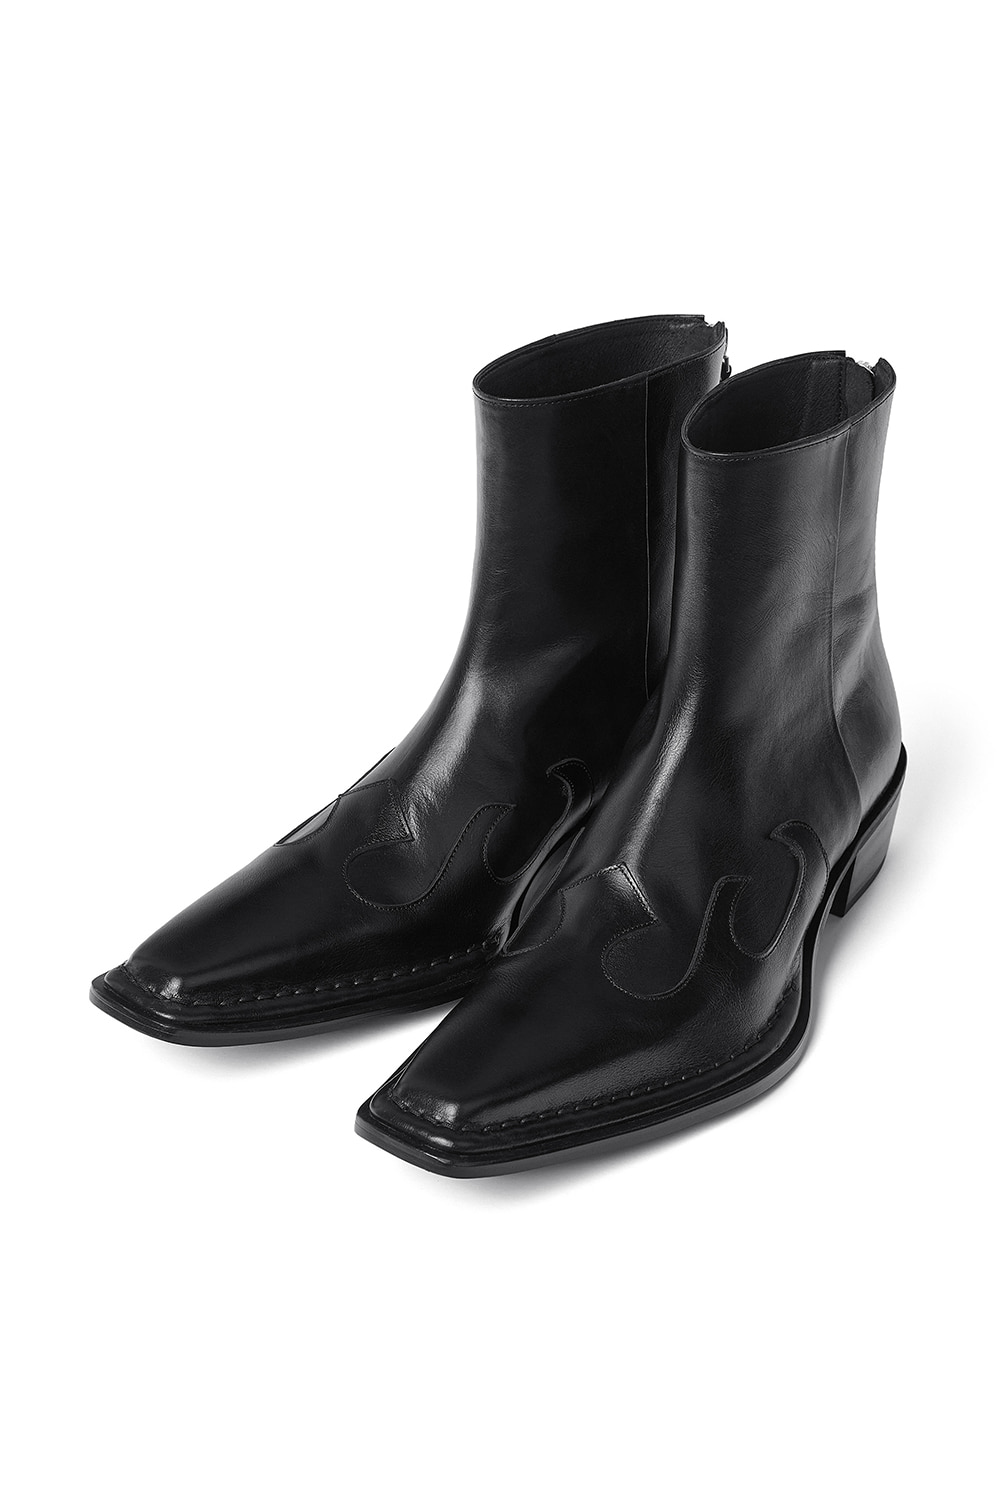 WESTERN ANKLE BOOTS [BLACK]		